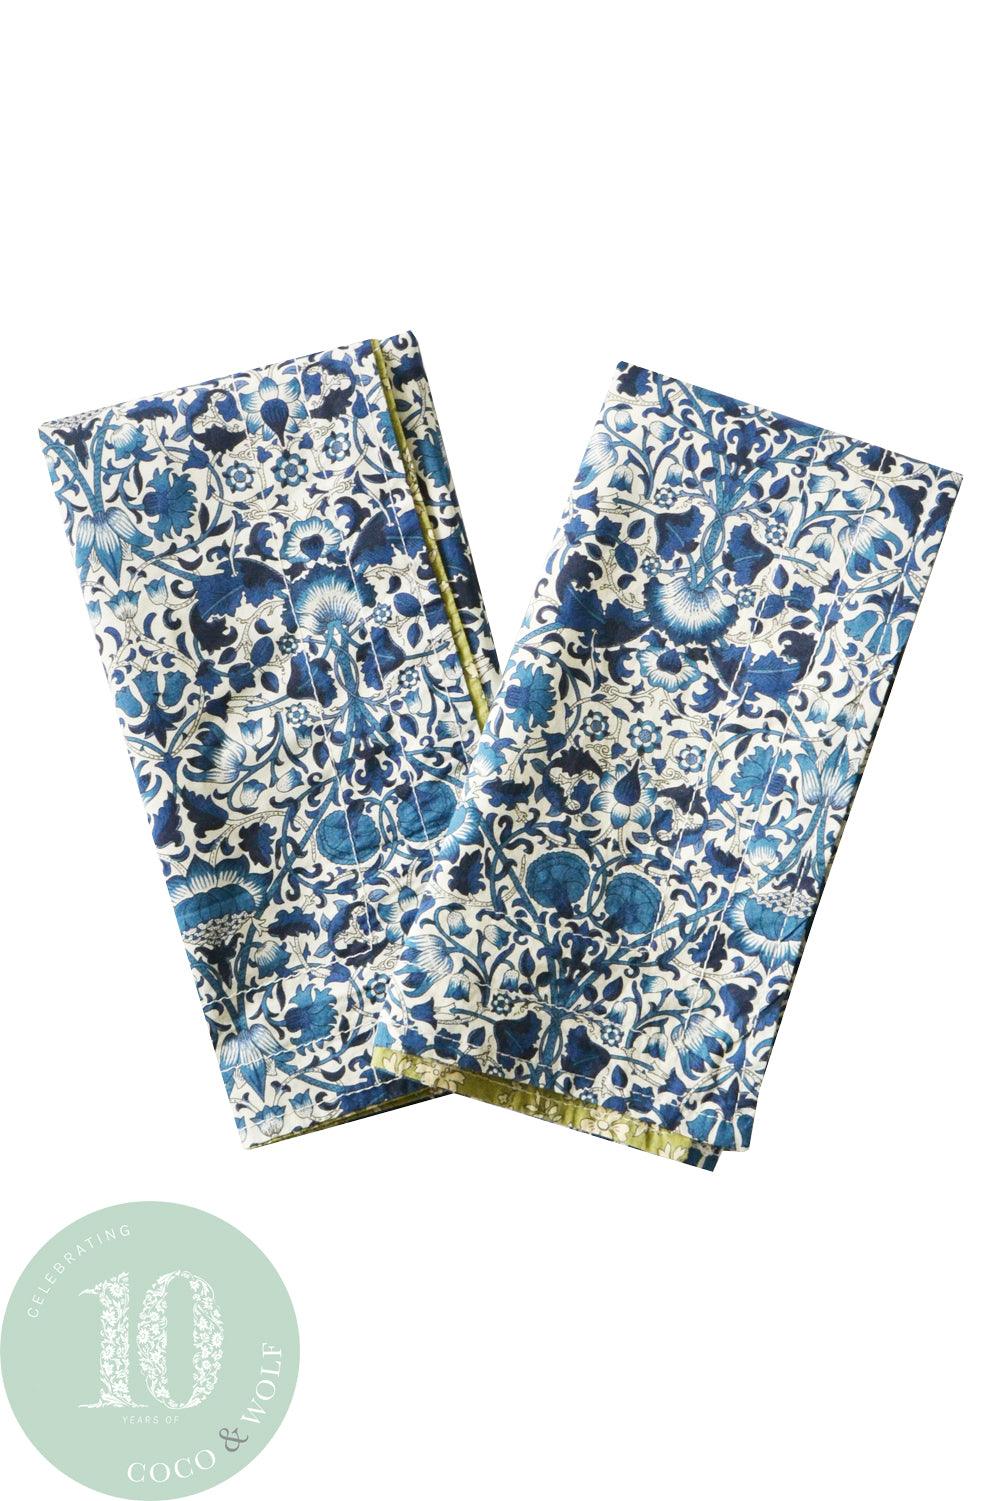 Reversible Stitch Napkin Set made with Liberty Fabric LODDEN & CAPEL - Coco & Wolf